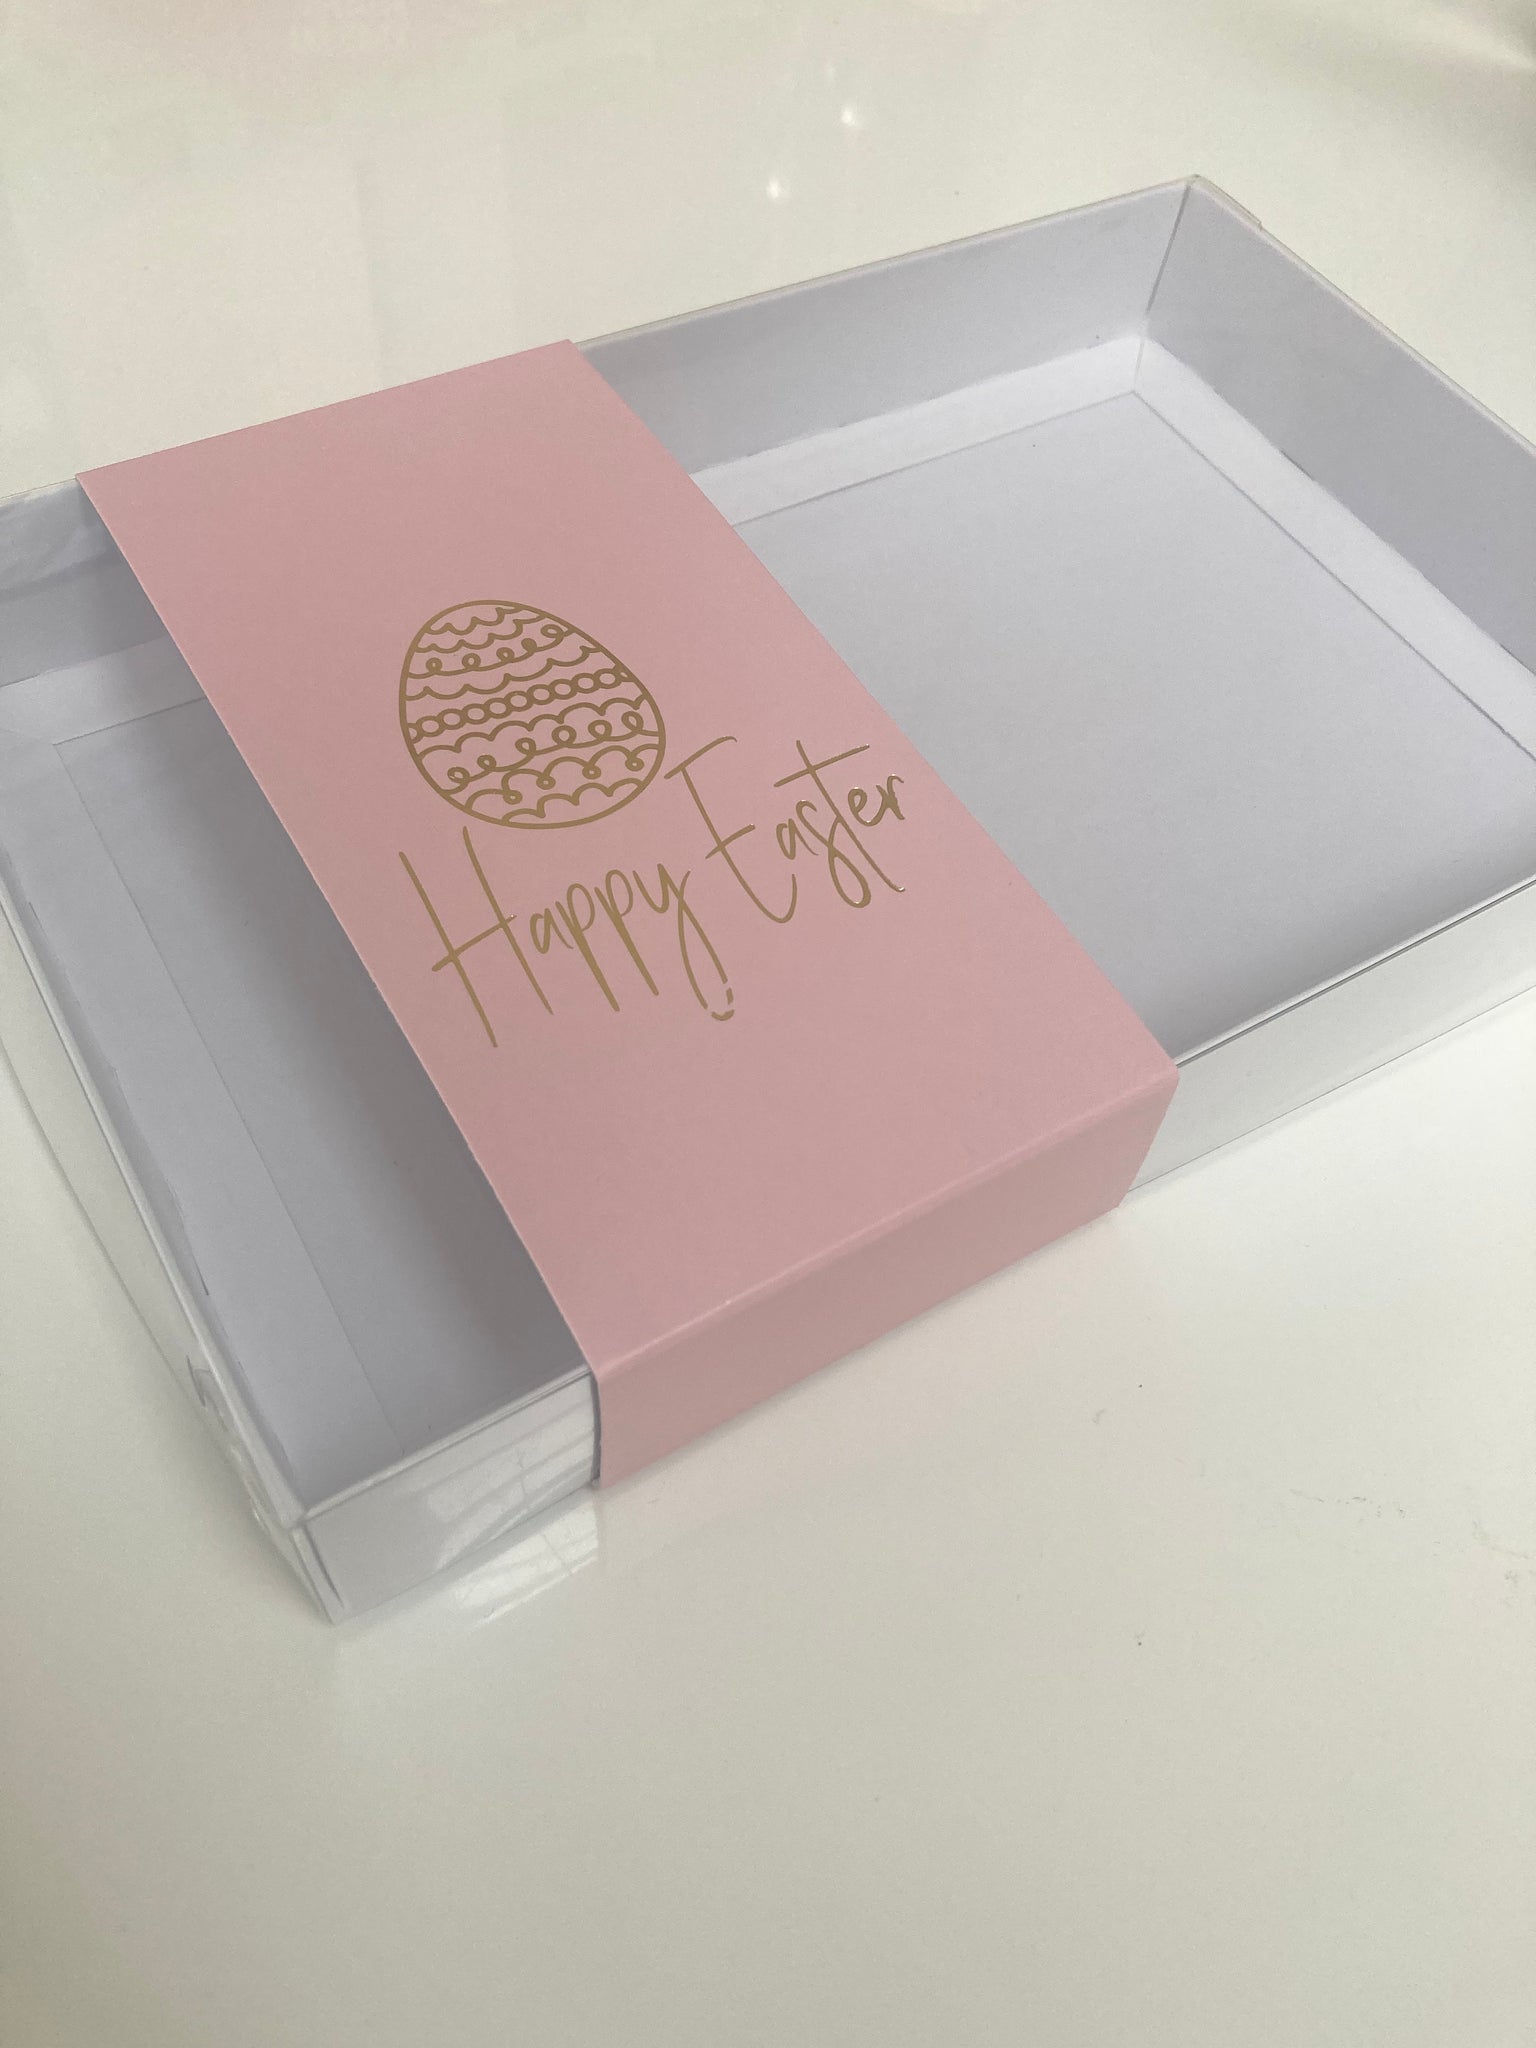 HAPPY EASTER CLEAR LID GIFT BOX BLANK 240x155x30mm